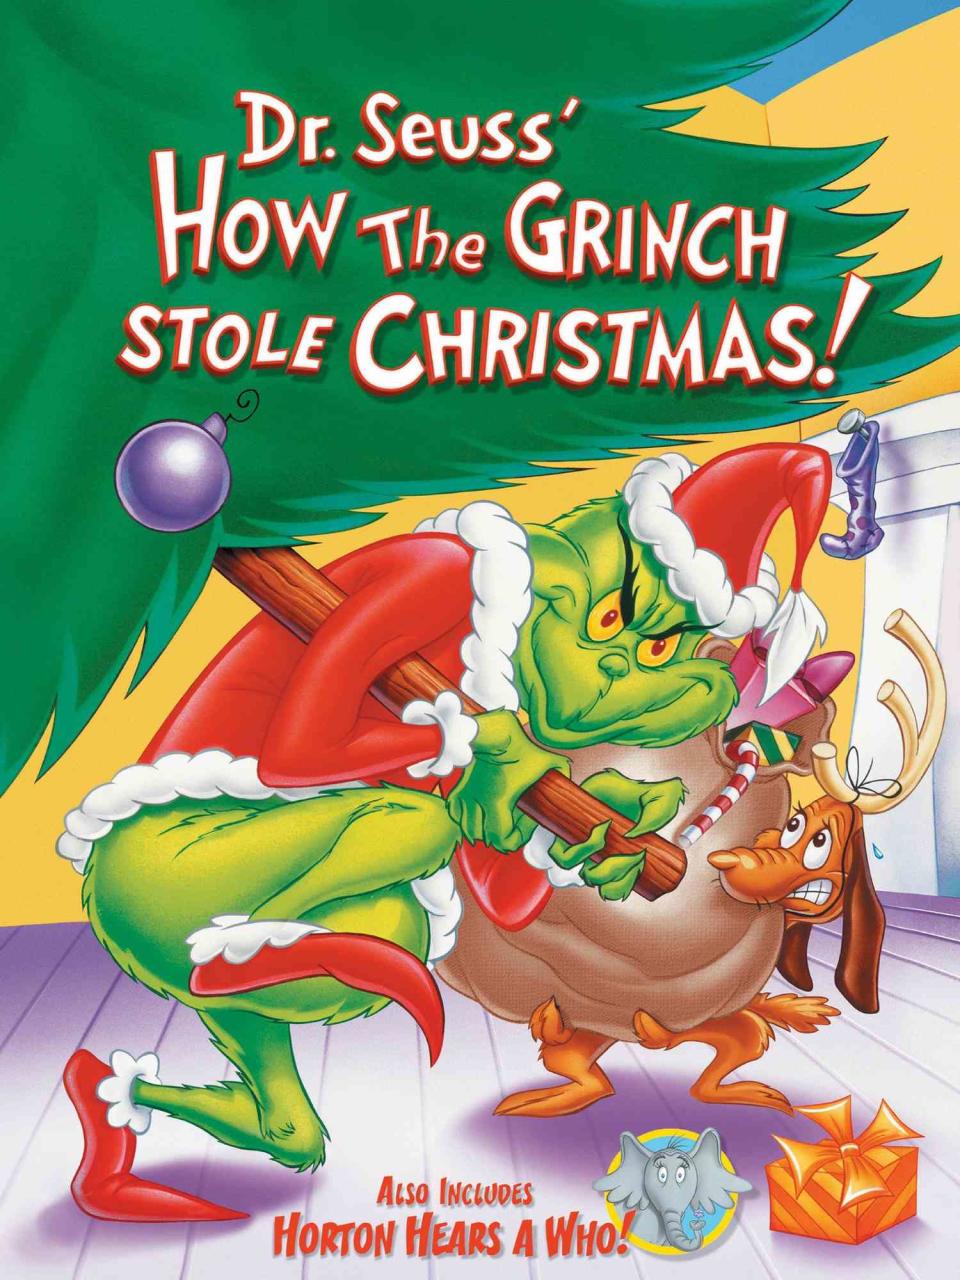 DVD cover of how the grinch stole Christmas